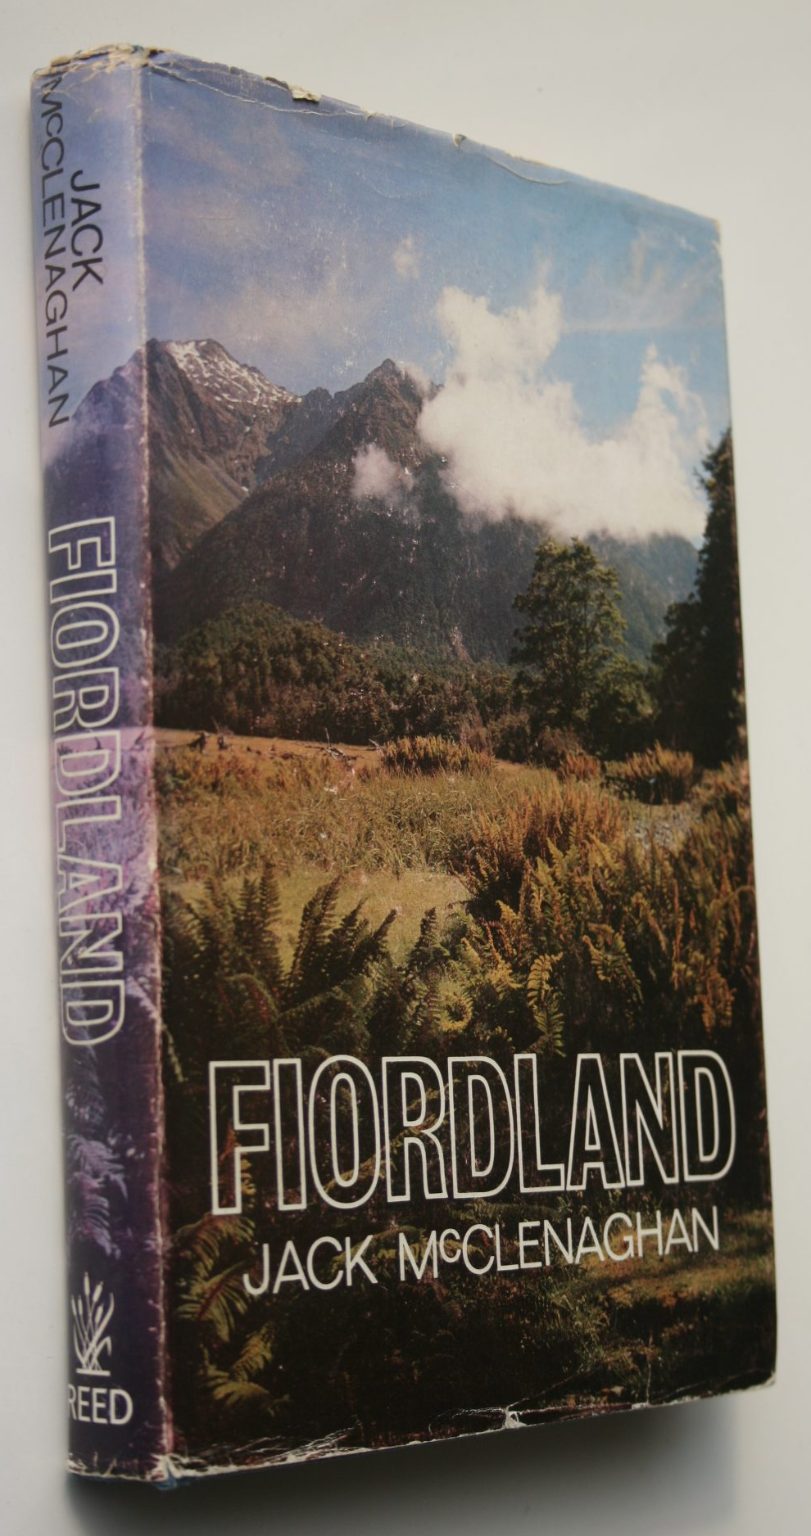 Fiordland by Jack McClenaghan. 1966, first edition.